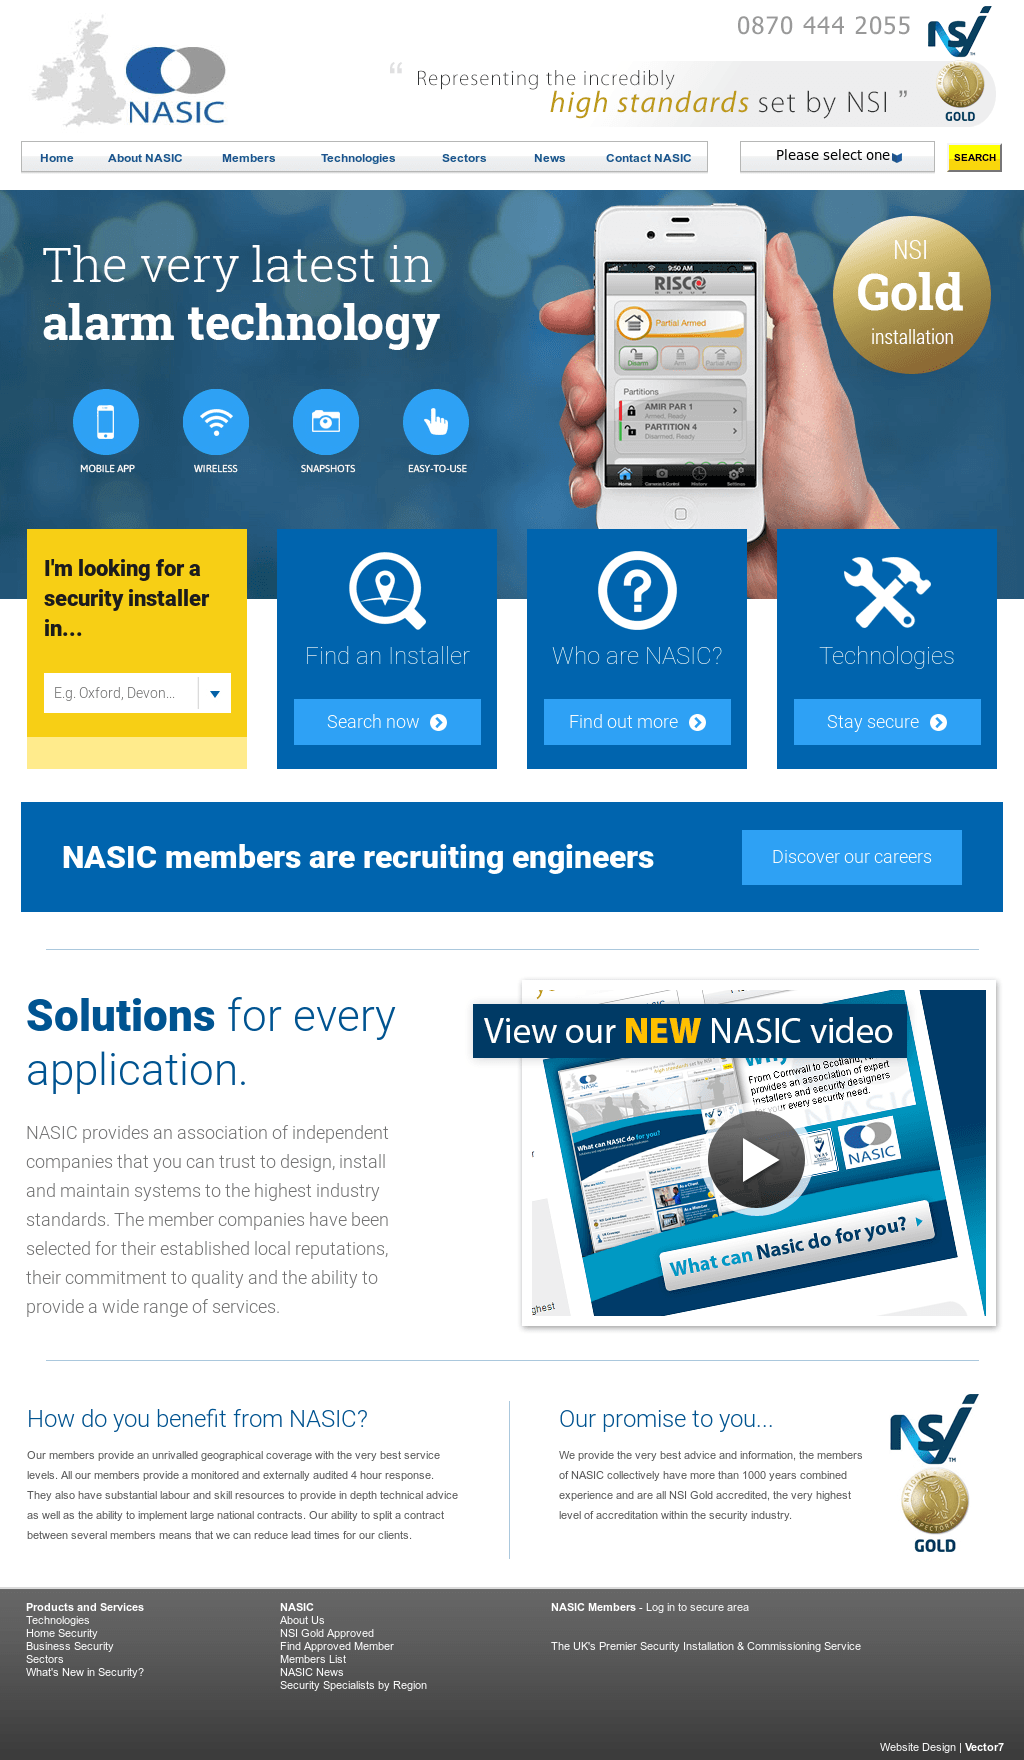 Nasic Logo - Nasic Competitors, Revenue and Employees - Owler Company Profile